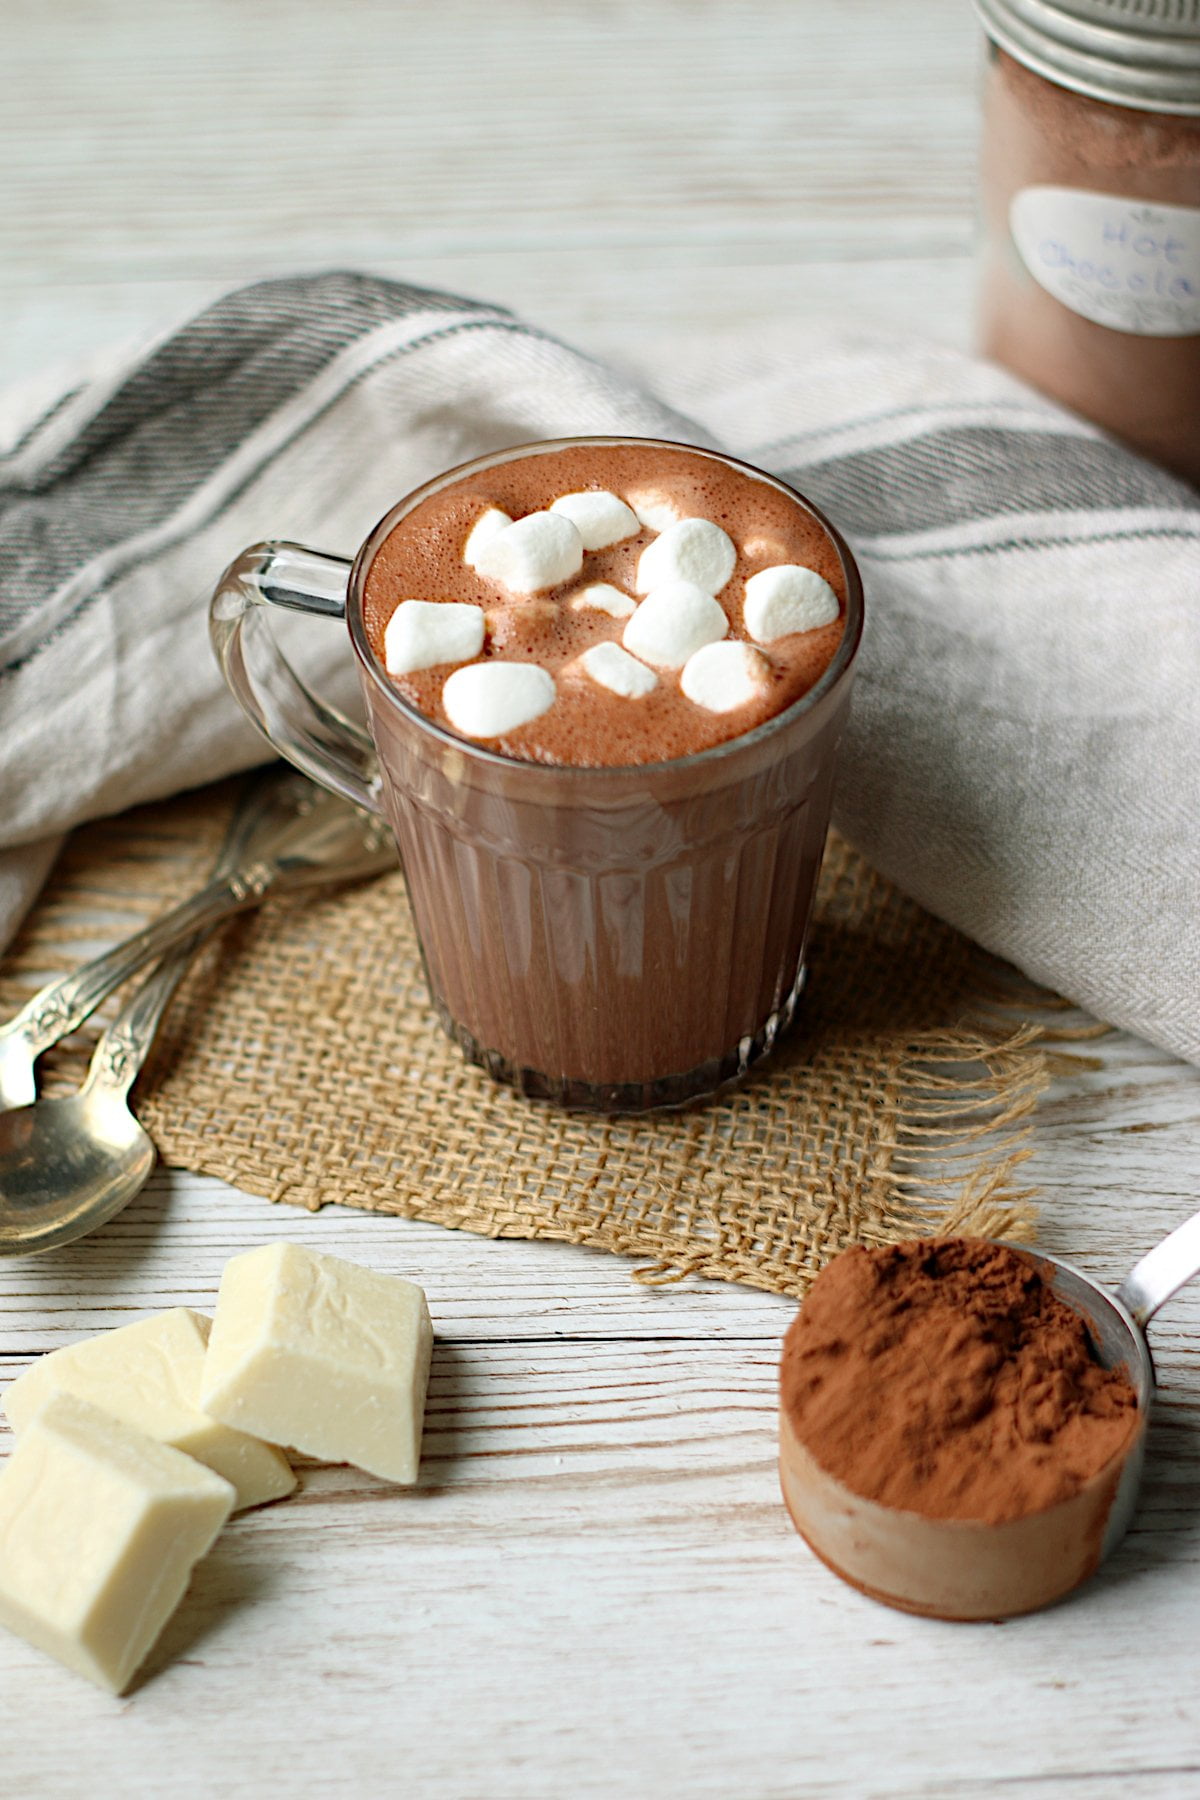 Homemade hot chocolate with mini marshmallows in a clear glass mug.